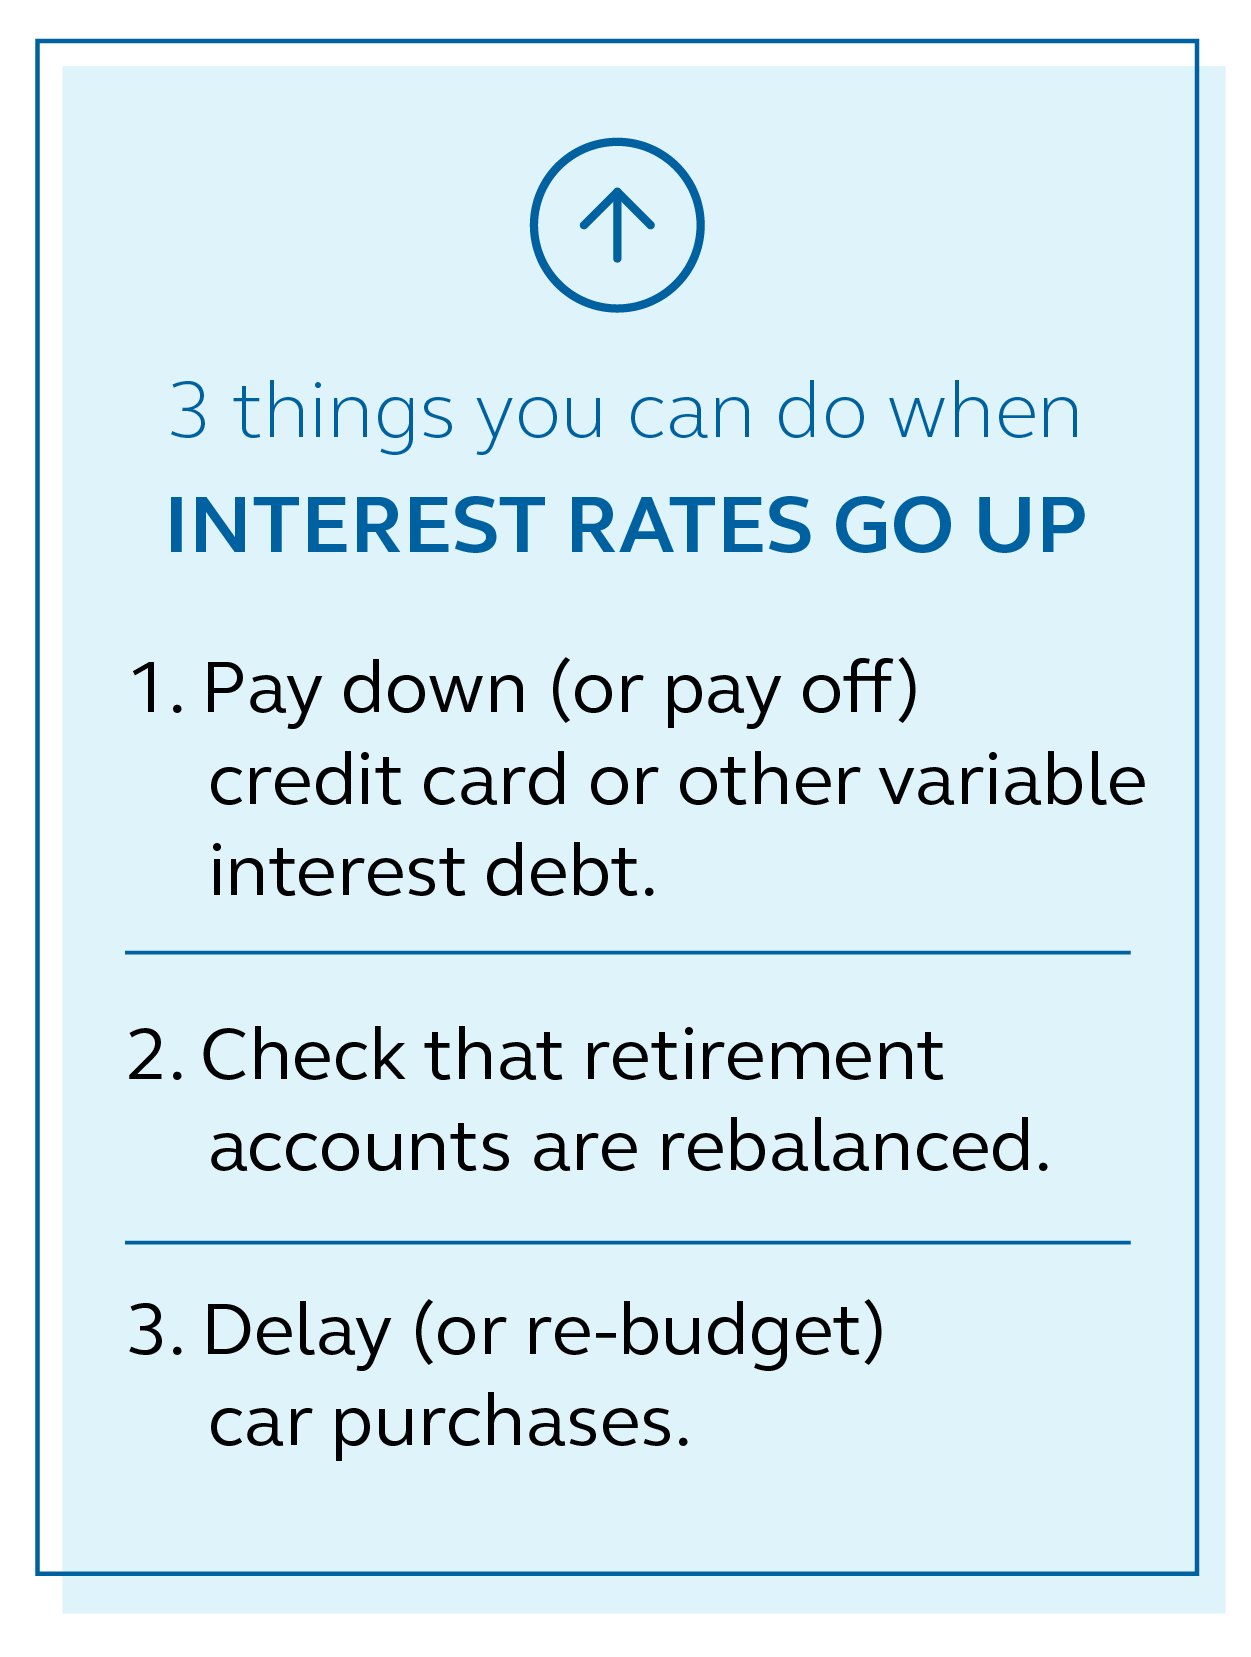 Illustration showing three things you can do when intestest rates go up: one pay down or pay off credit card debt, two check retirement accounts are balanced and three delay car purchases.